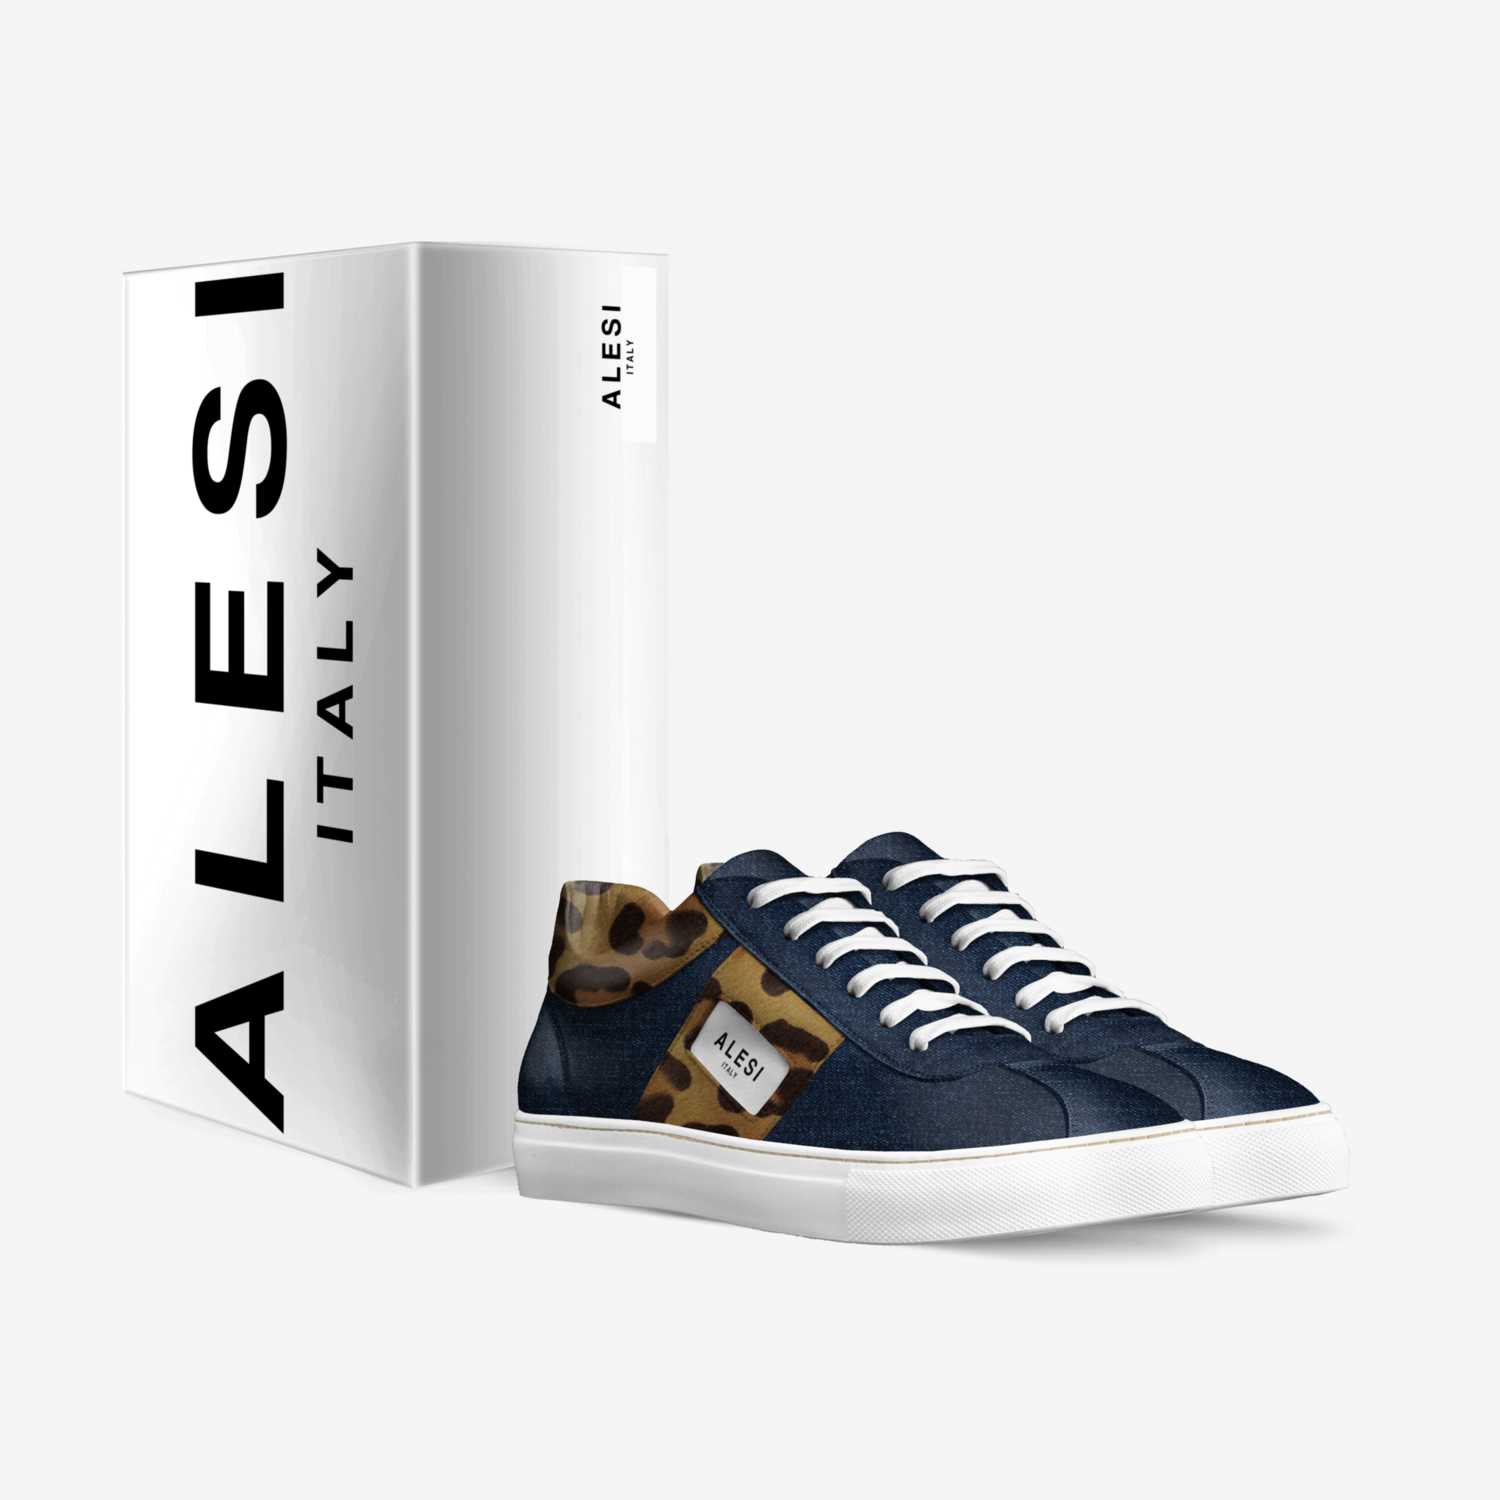 Alesi Lo custom made in Italy shoes by Lonanthony Parker | Box view